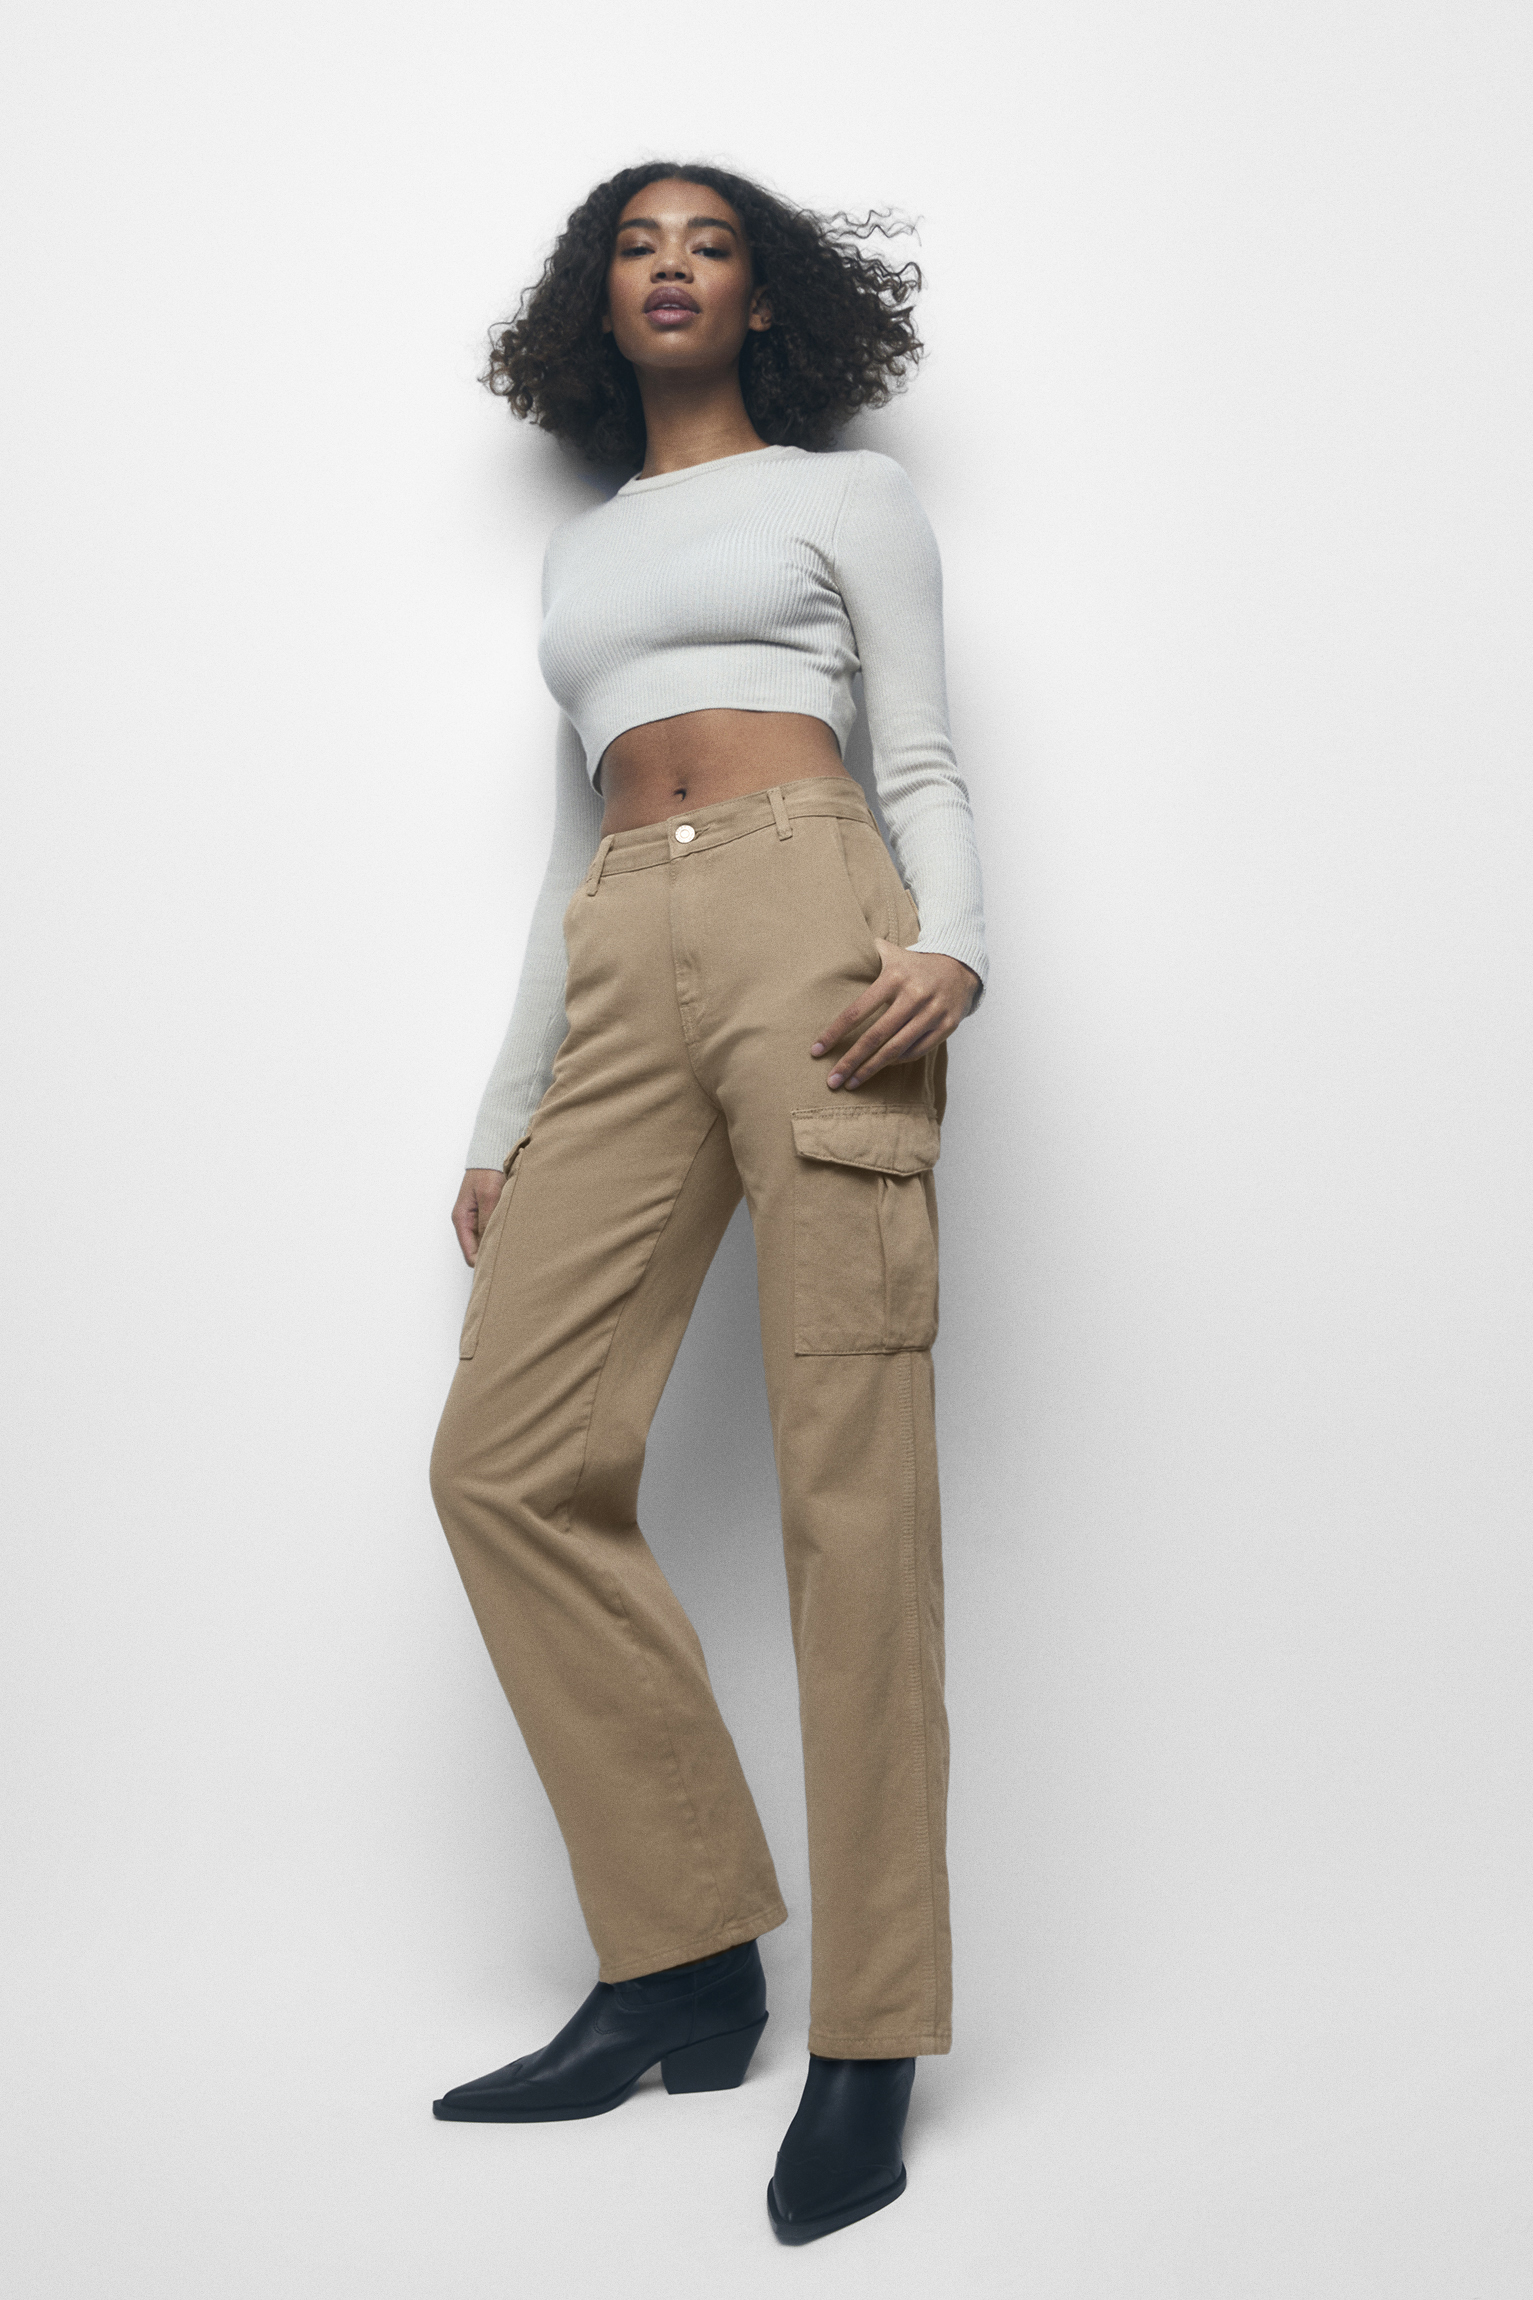 Top more than 62 khaki cargo trousers womens latest - in.cdgdbentre